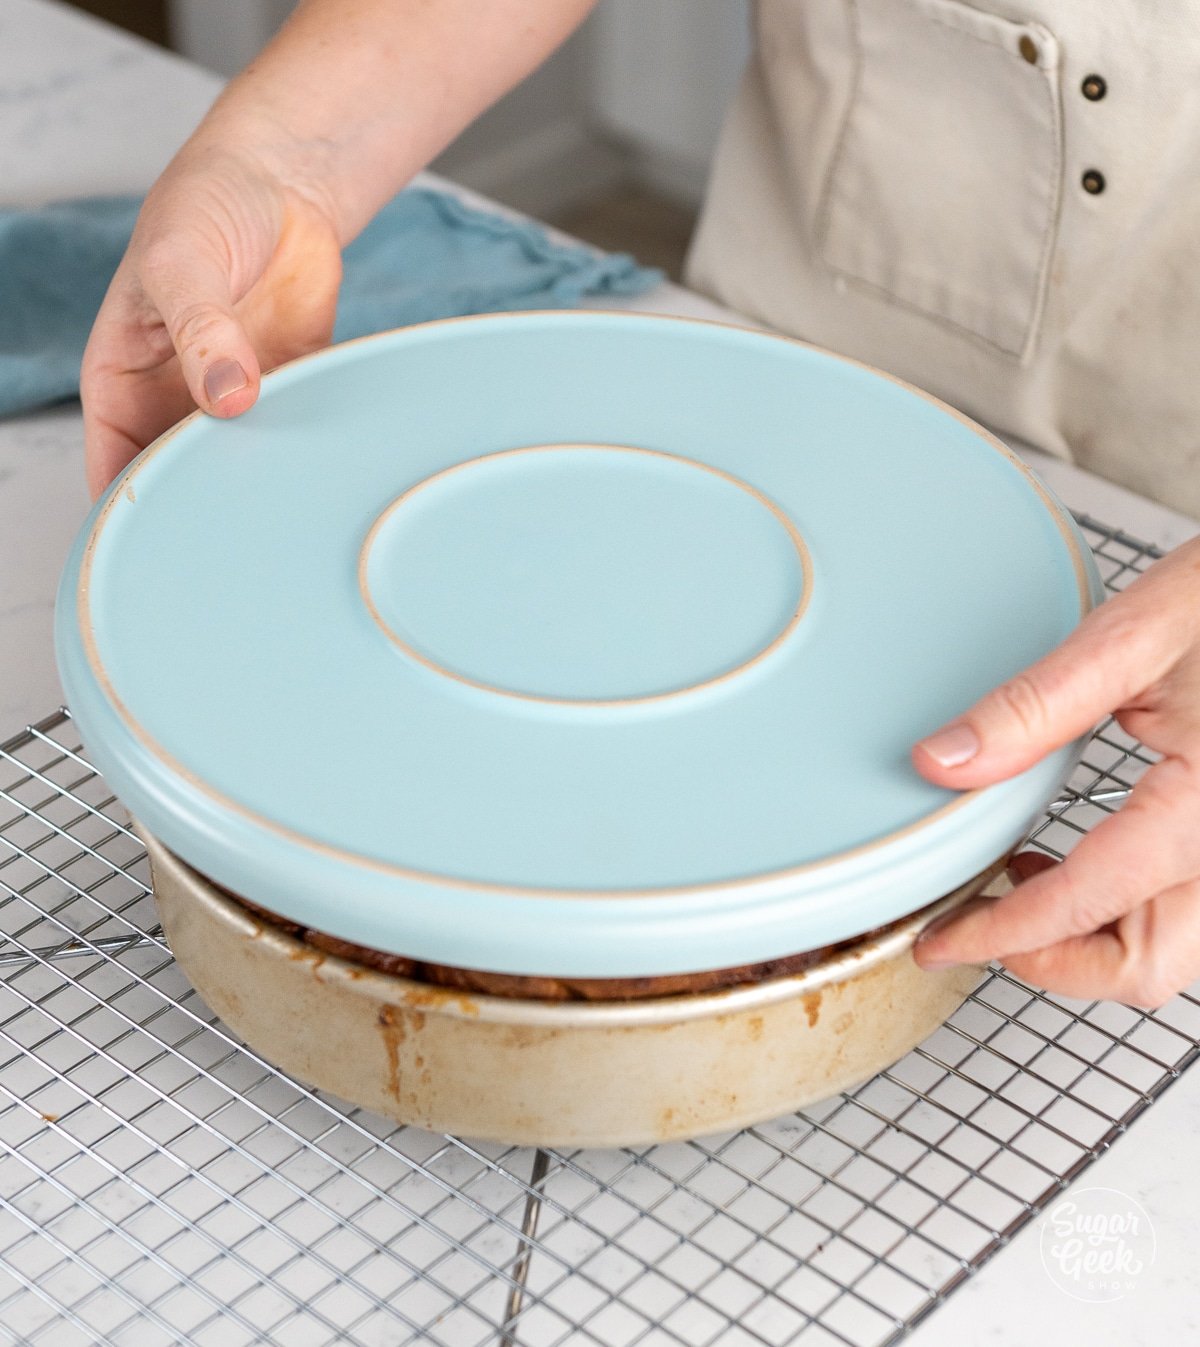 hands placing a blue plate upside down over sticky buns in a pan